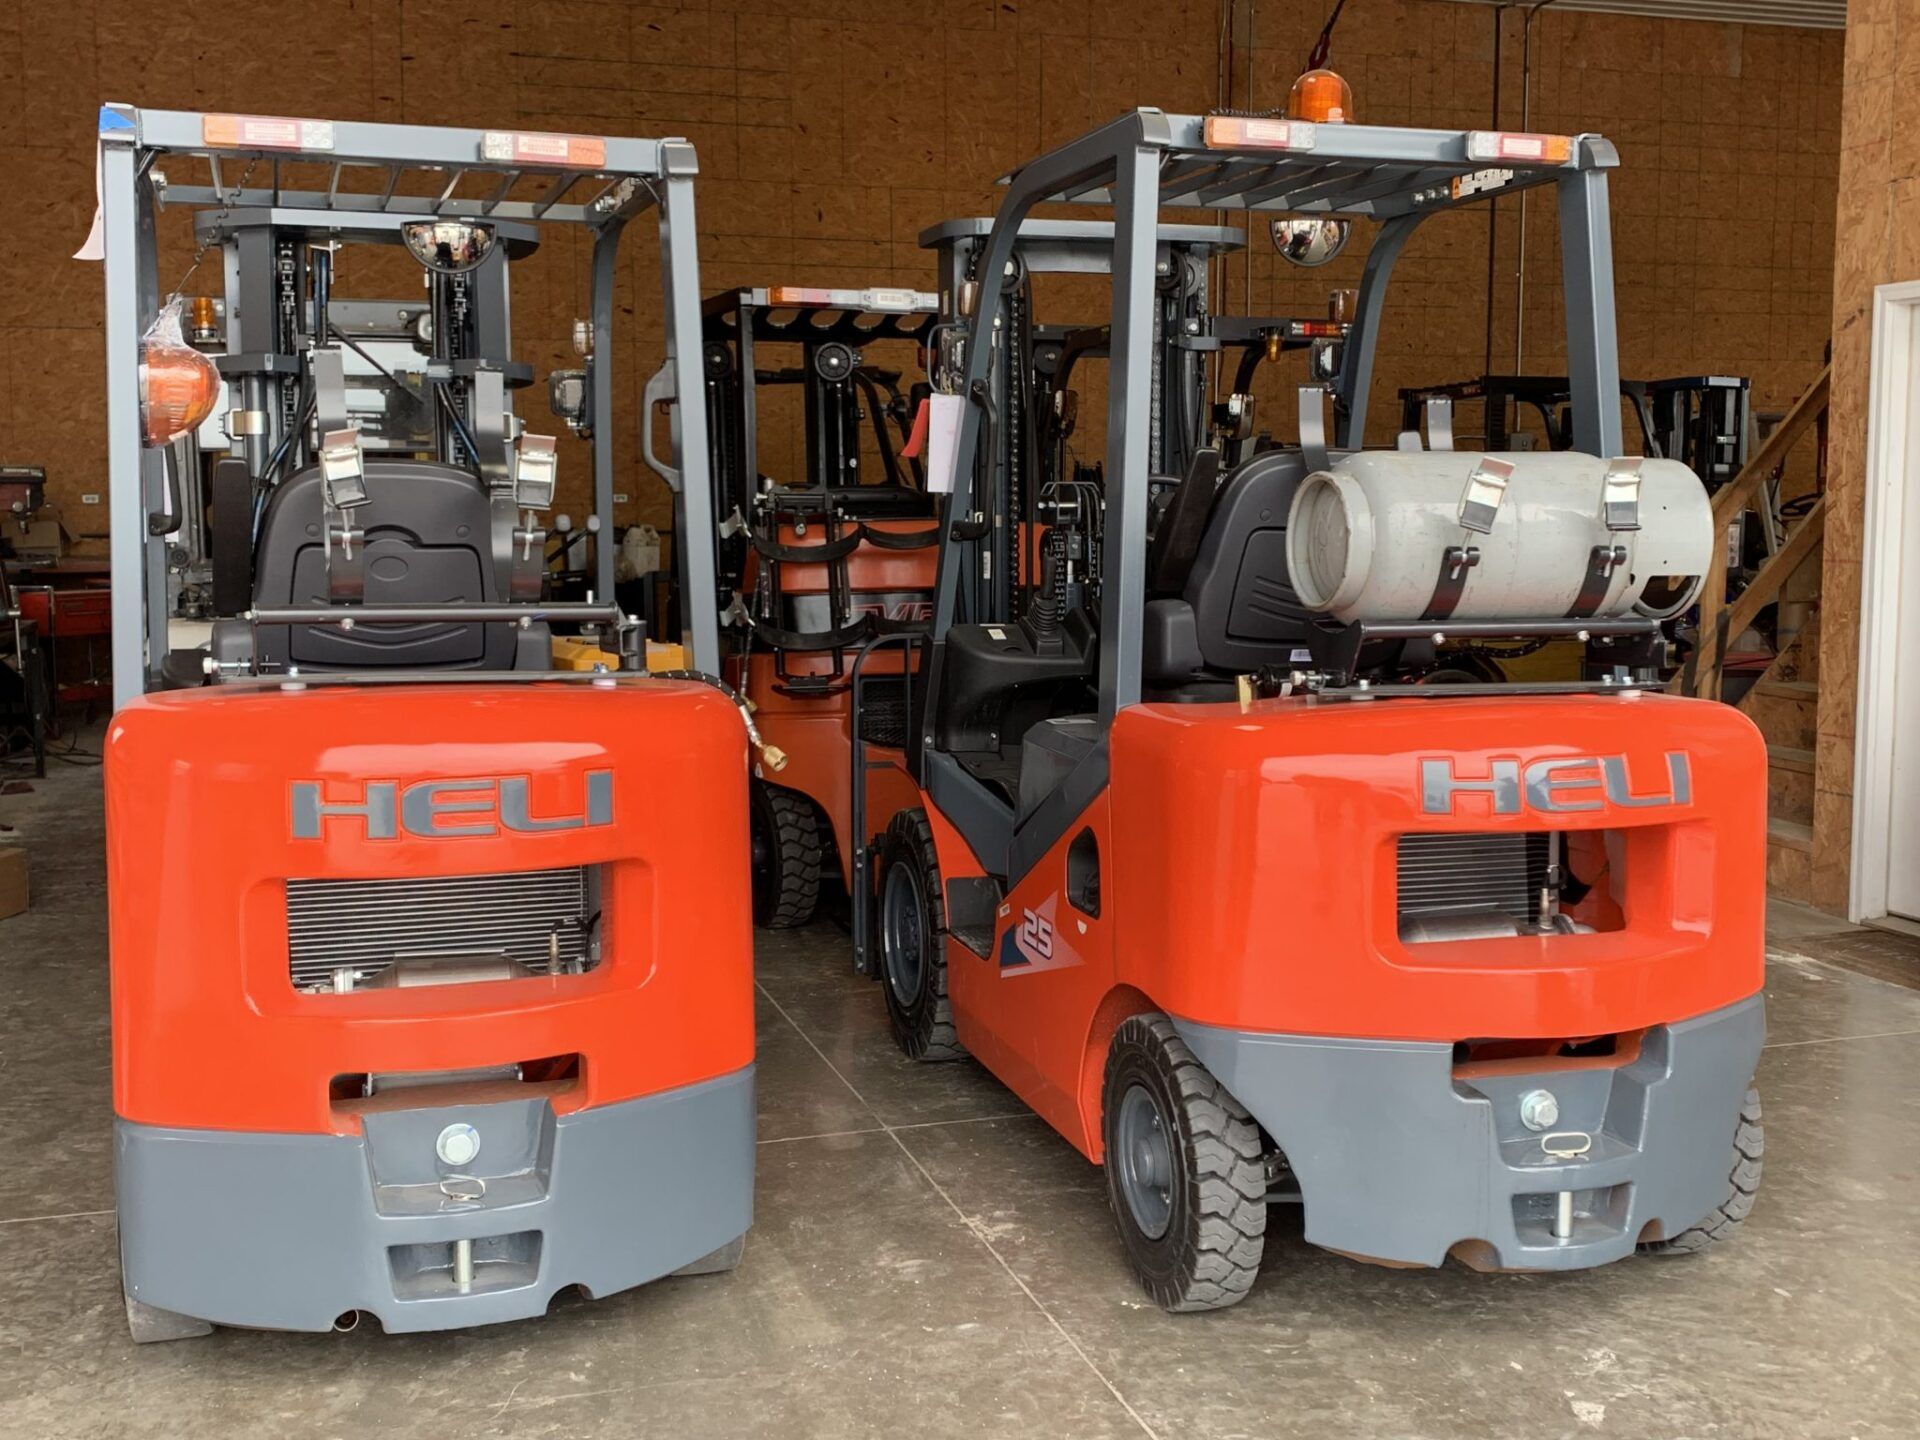 Sugar Creek | Rent A Forklift from Sugar Creek Today!